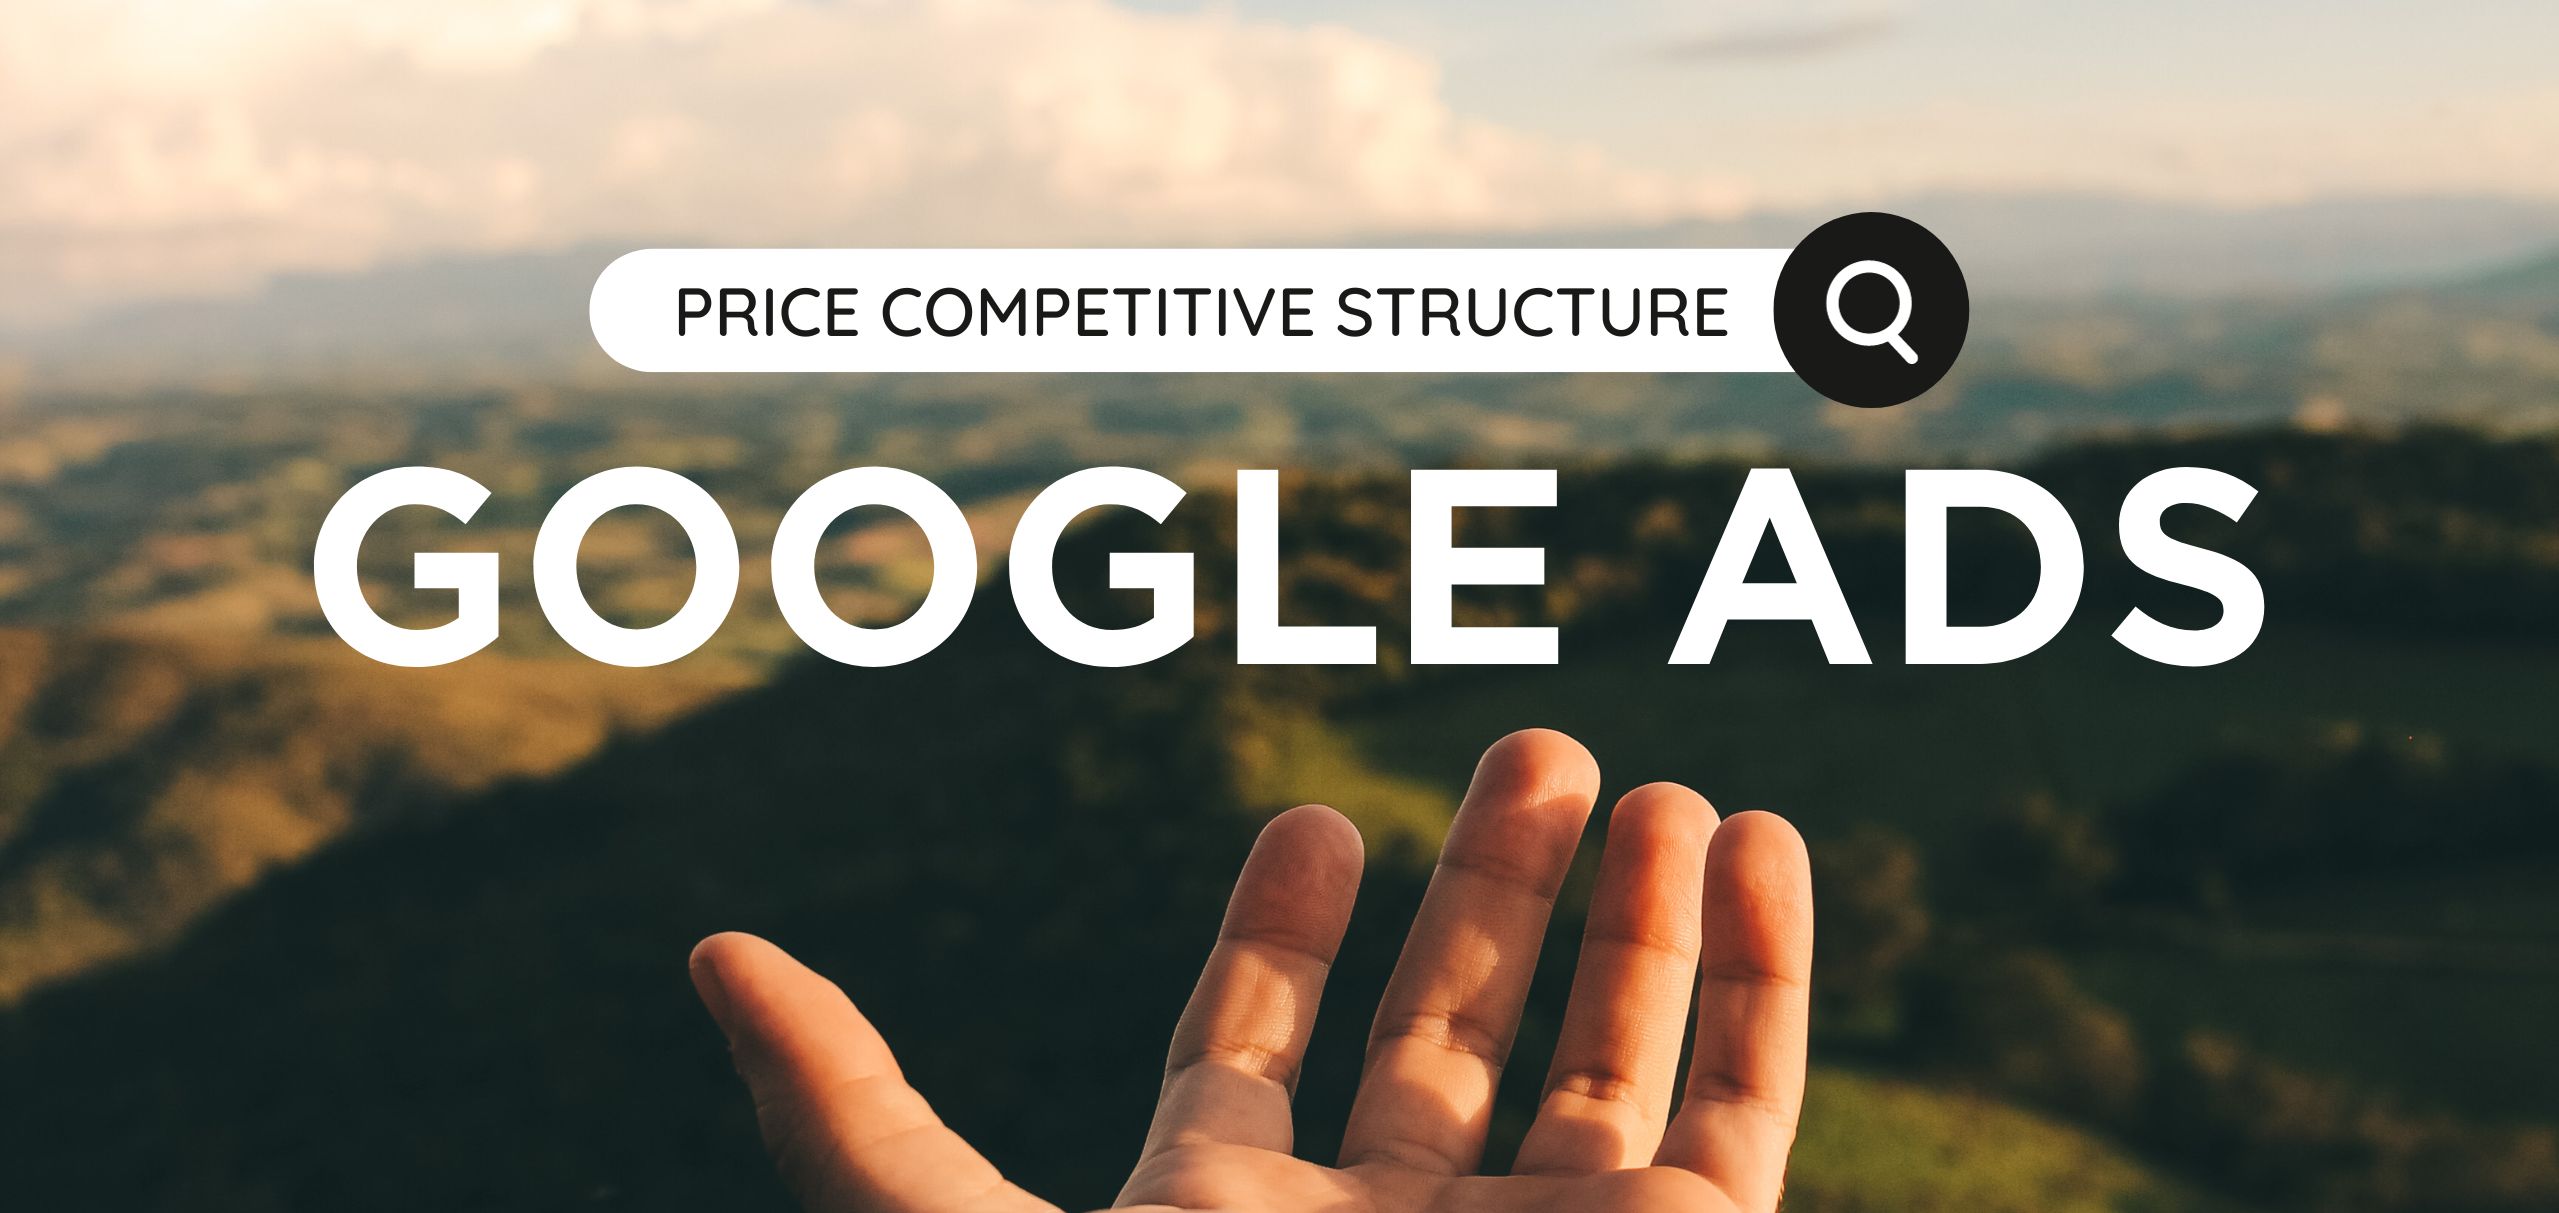 Find success in Google Ads with a price competitive structure